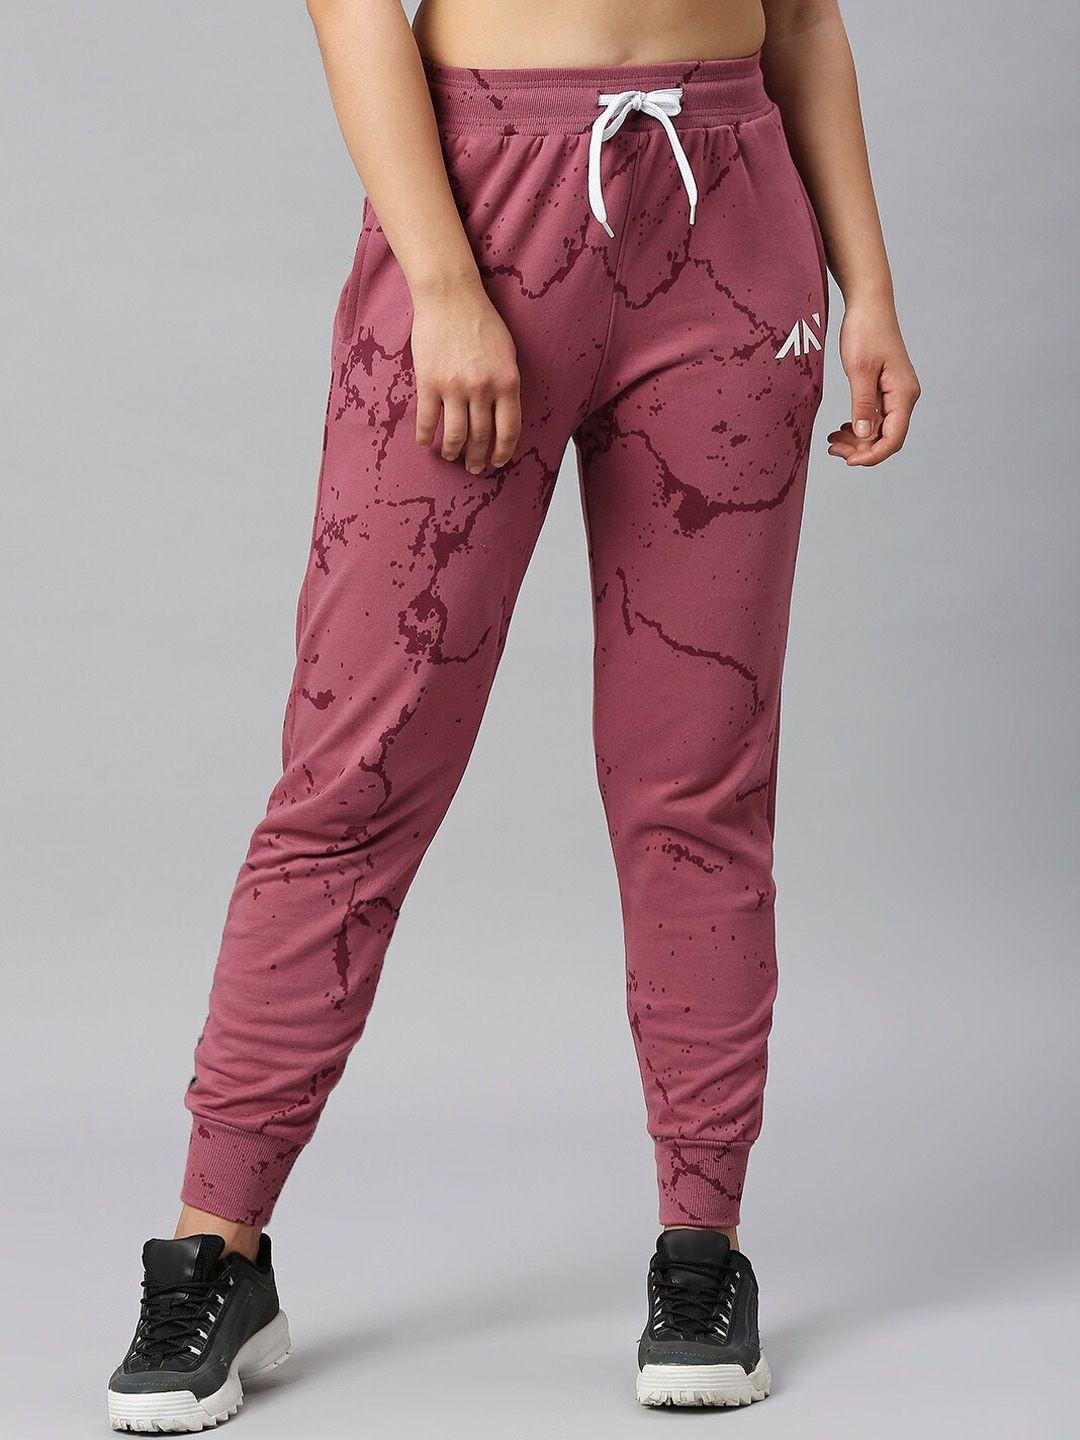 aesthetic nation marble printed cotton anti odour jogger